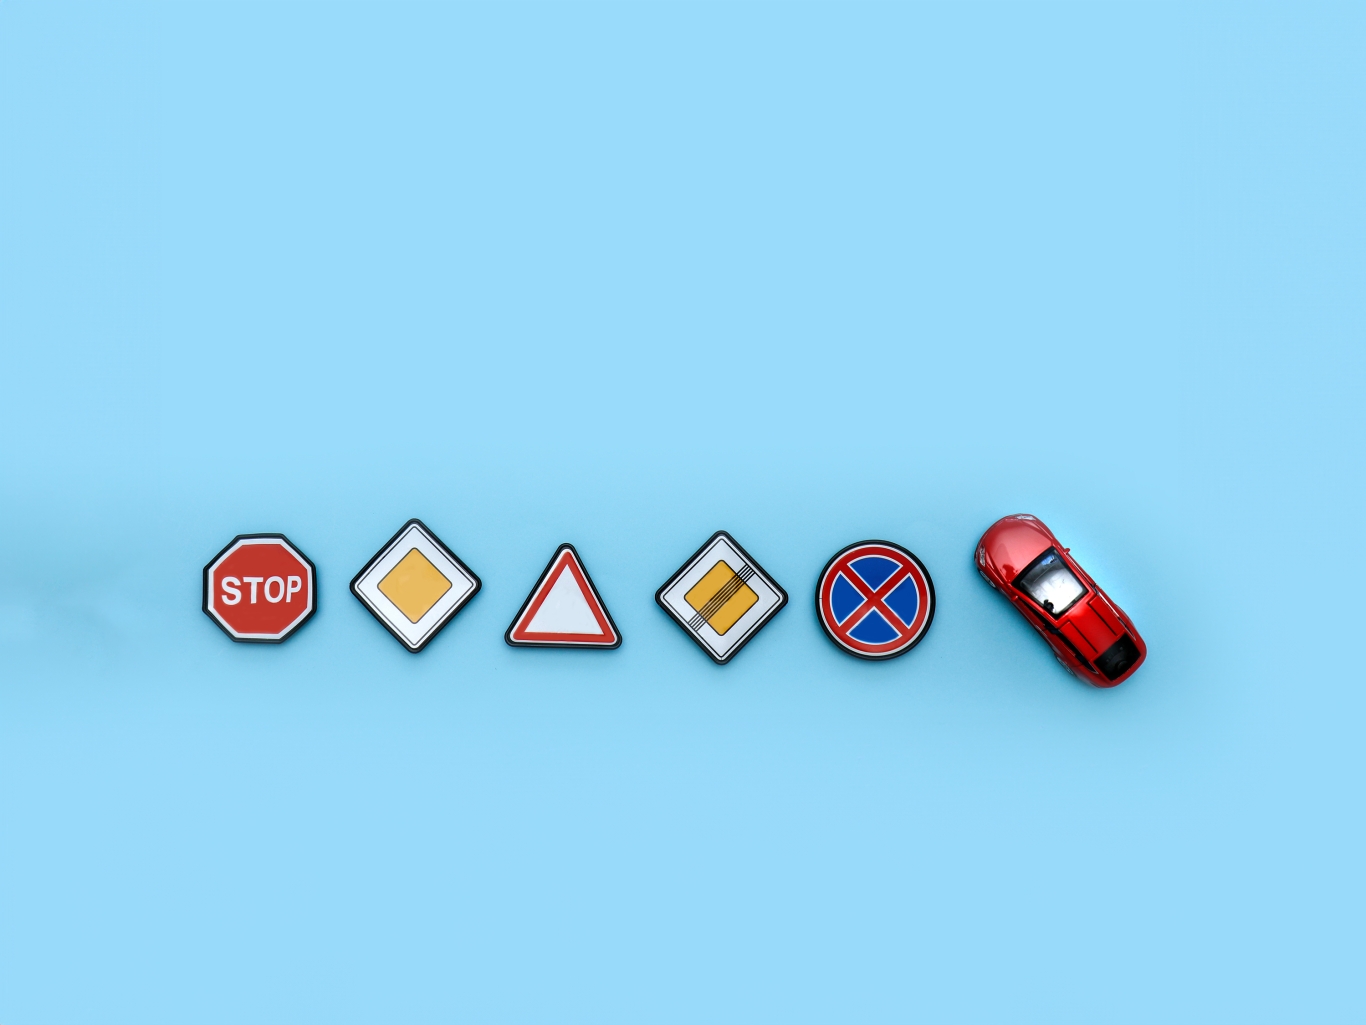 Road signs and toy car on blue background to show driving rules.